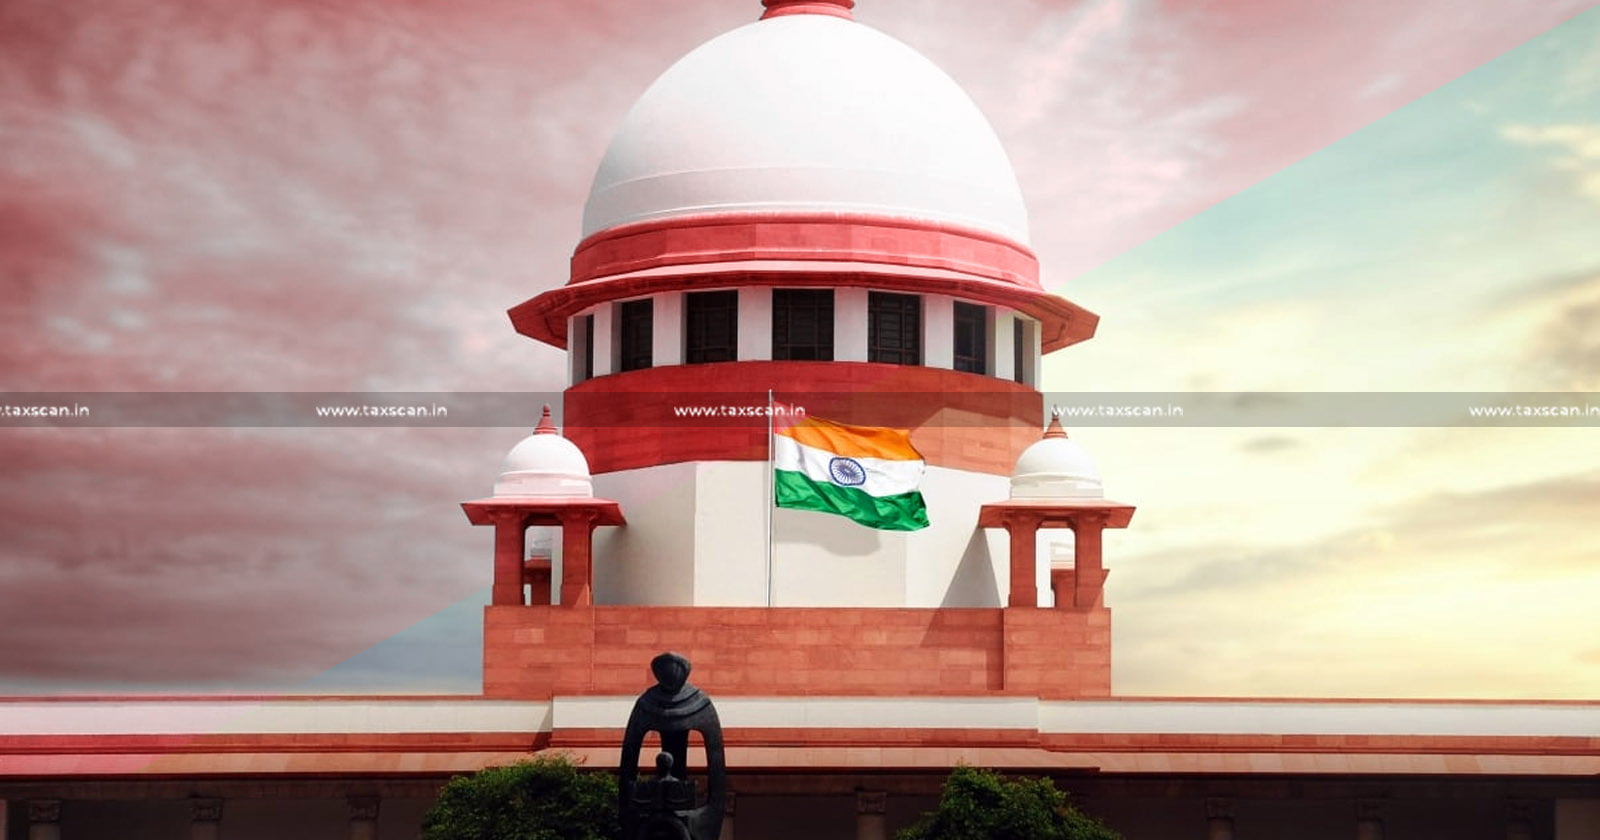 Supreme Court - Applicability of Tax Exemption - legitimate expectation - tax holiday exemption applicability - Taxscan